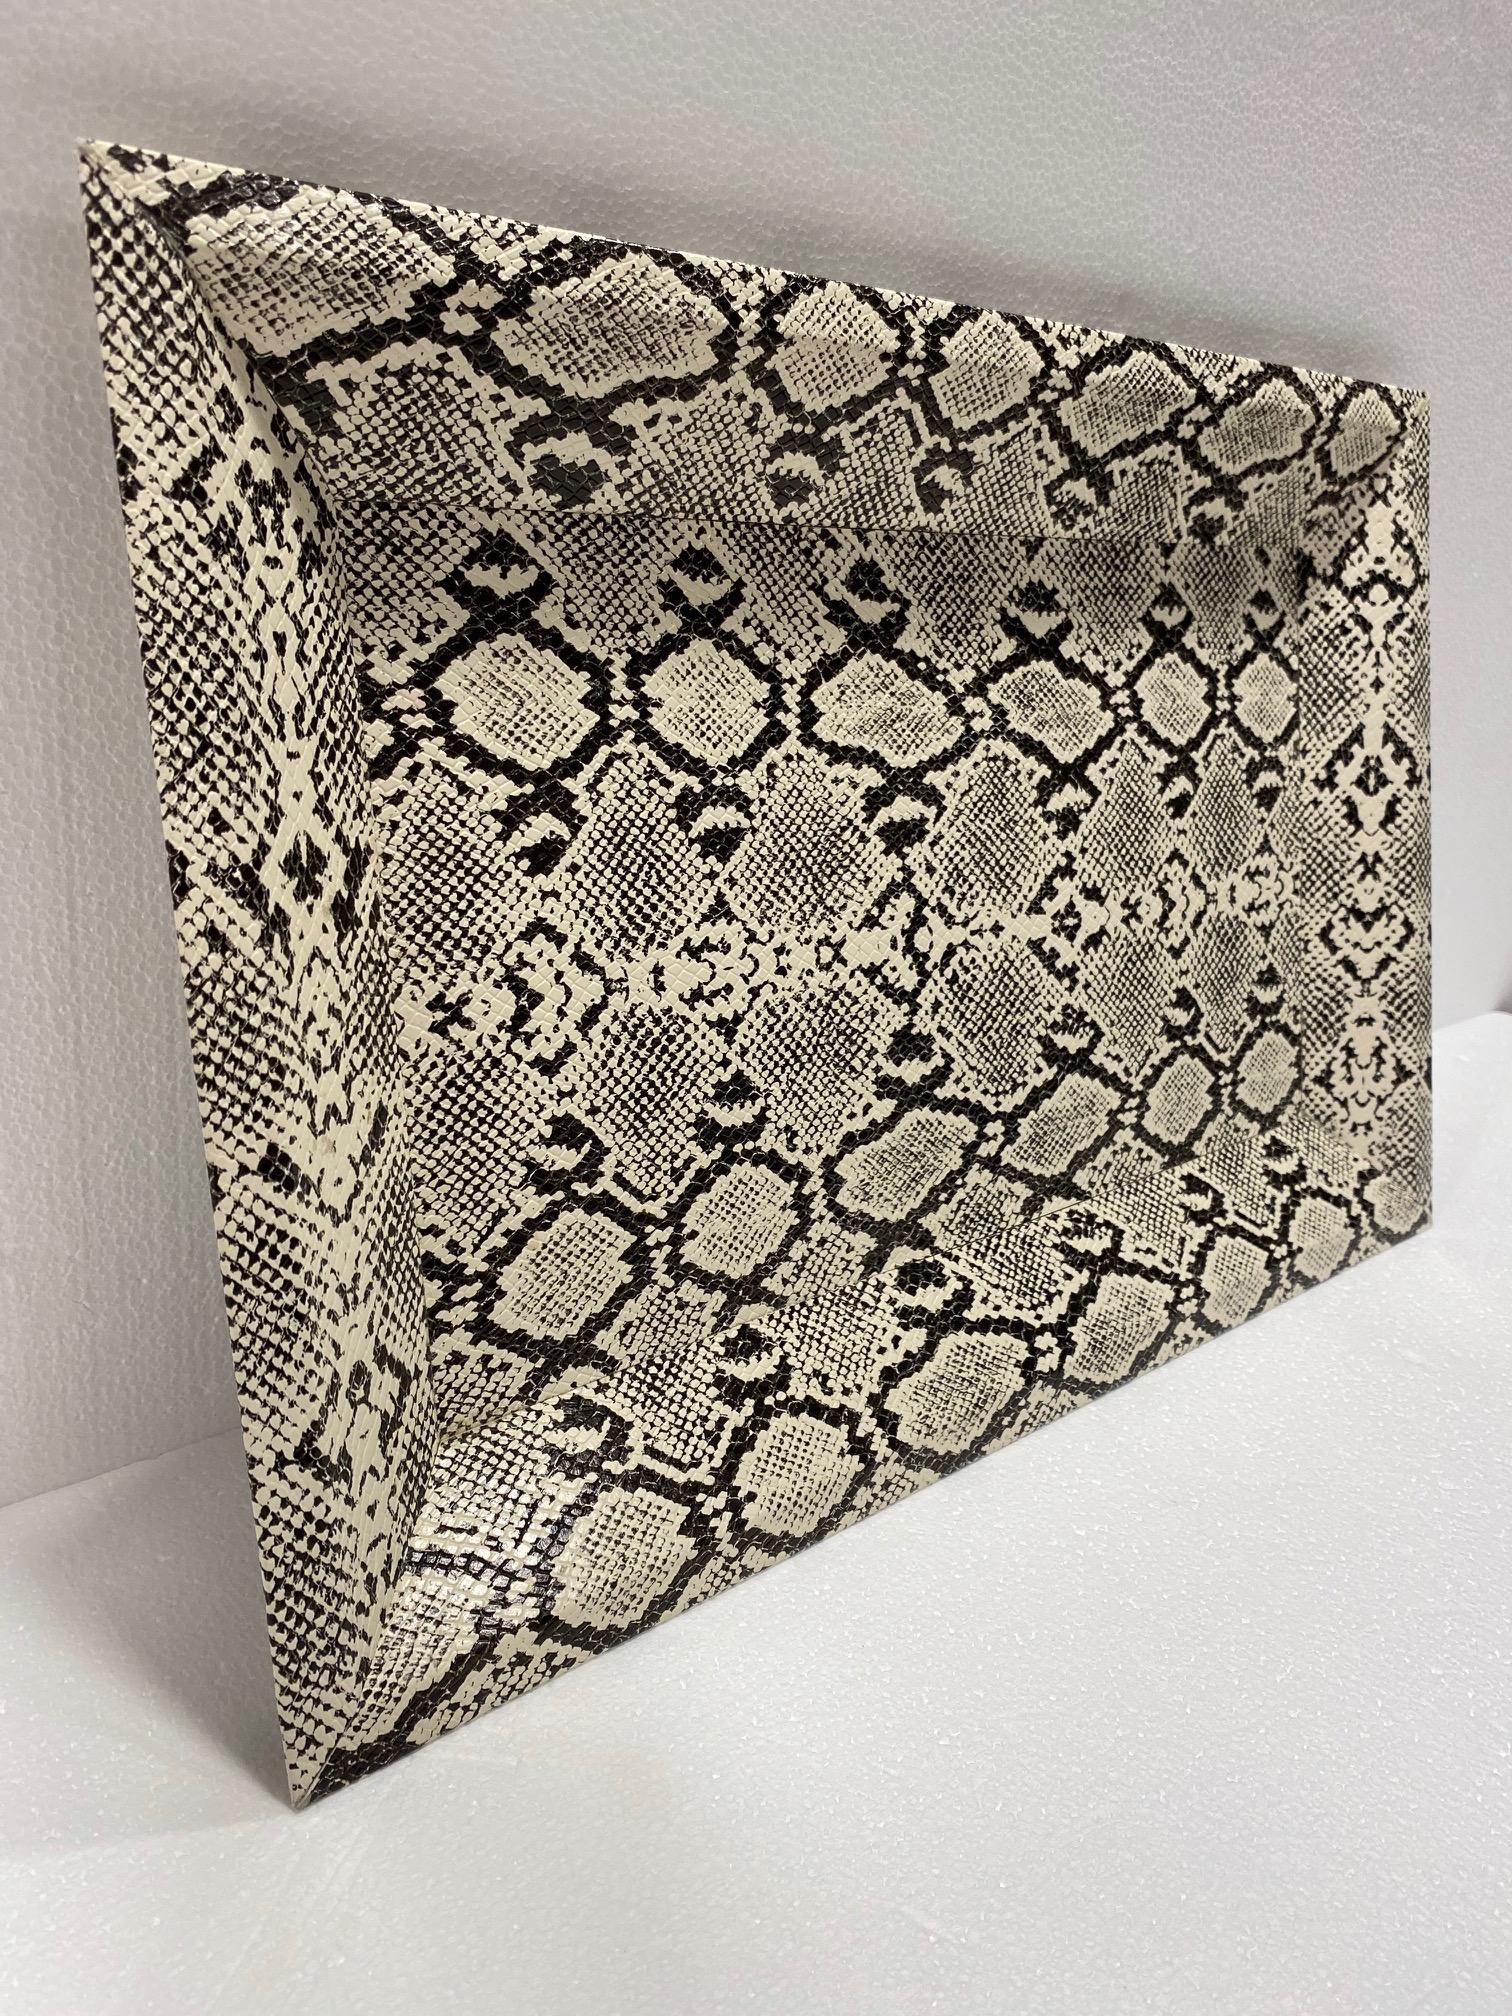 Mid-Century Modern Vintage Organic Modern Faux Python Leather Tray in Ivory and Black, circa 2010